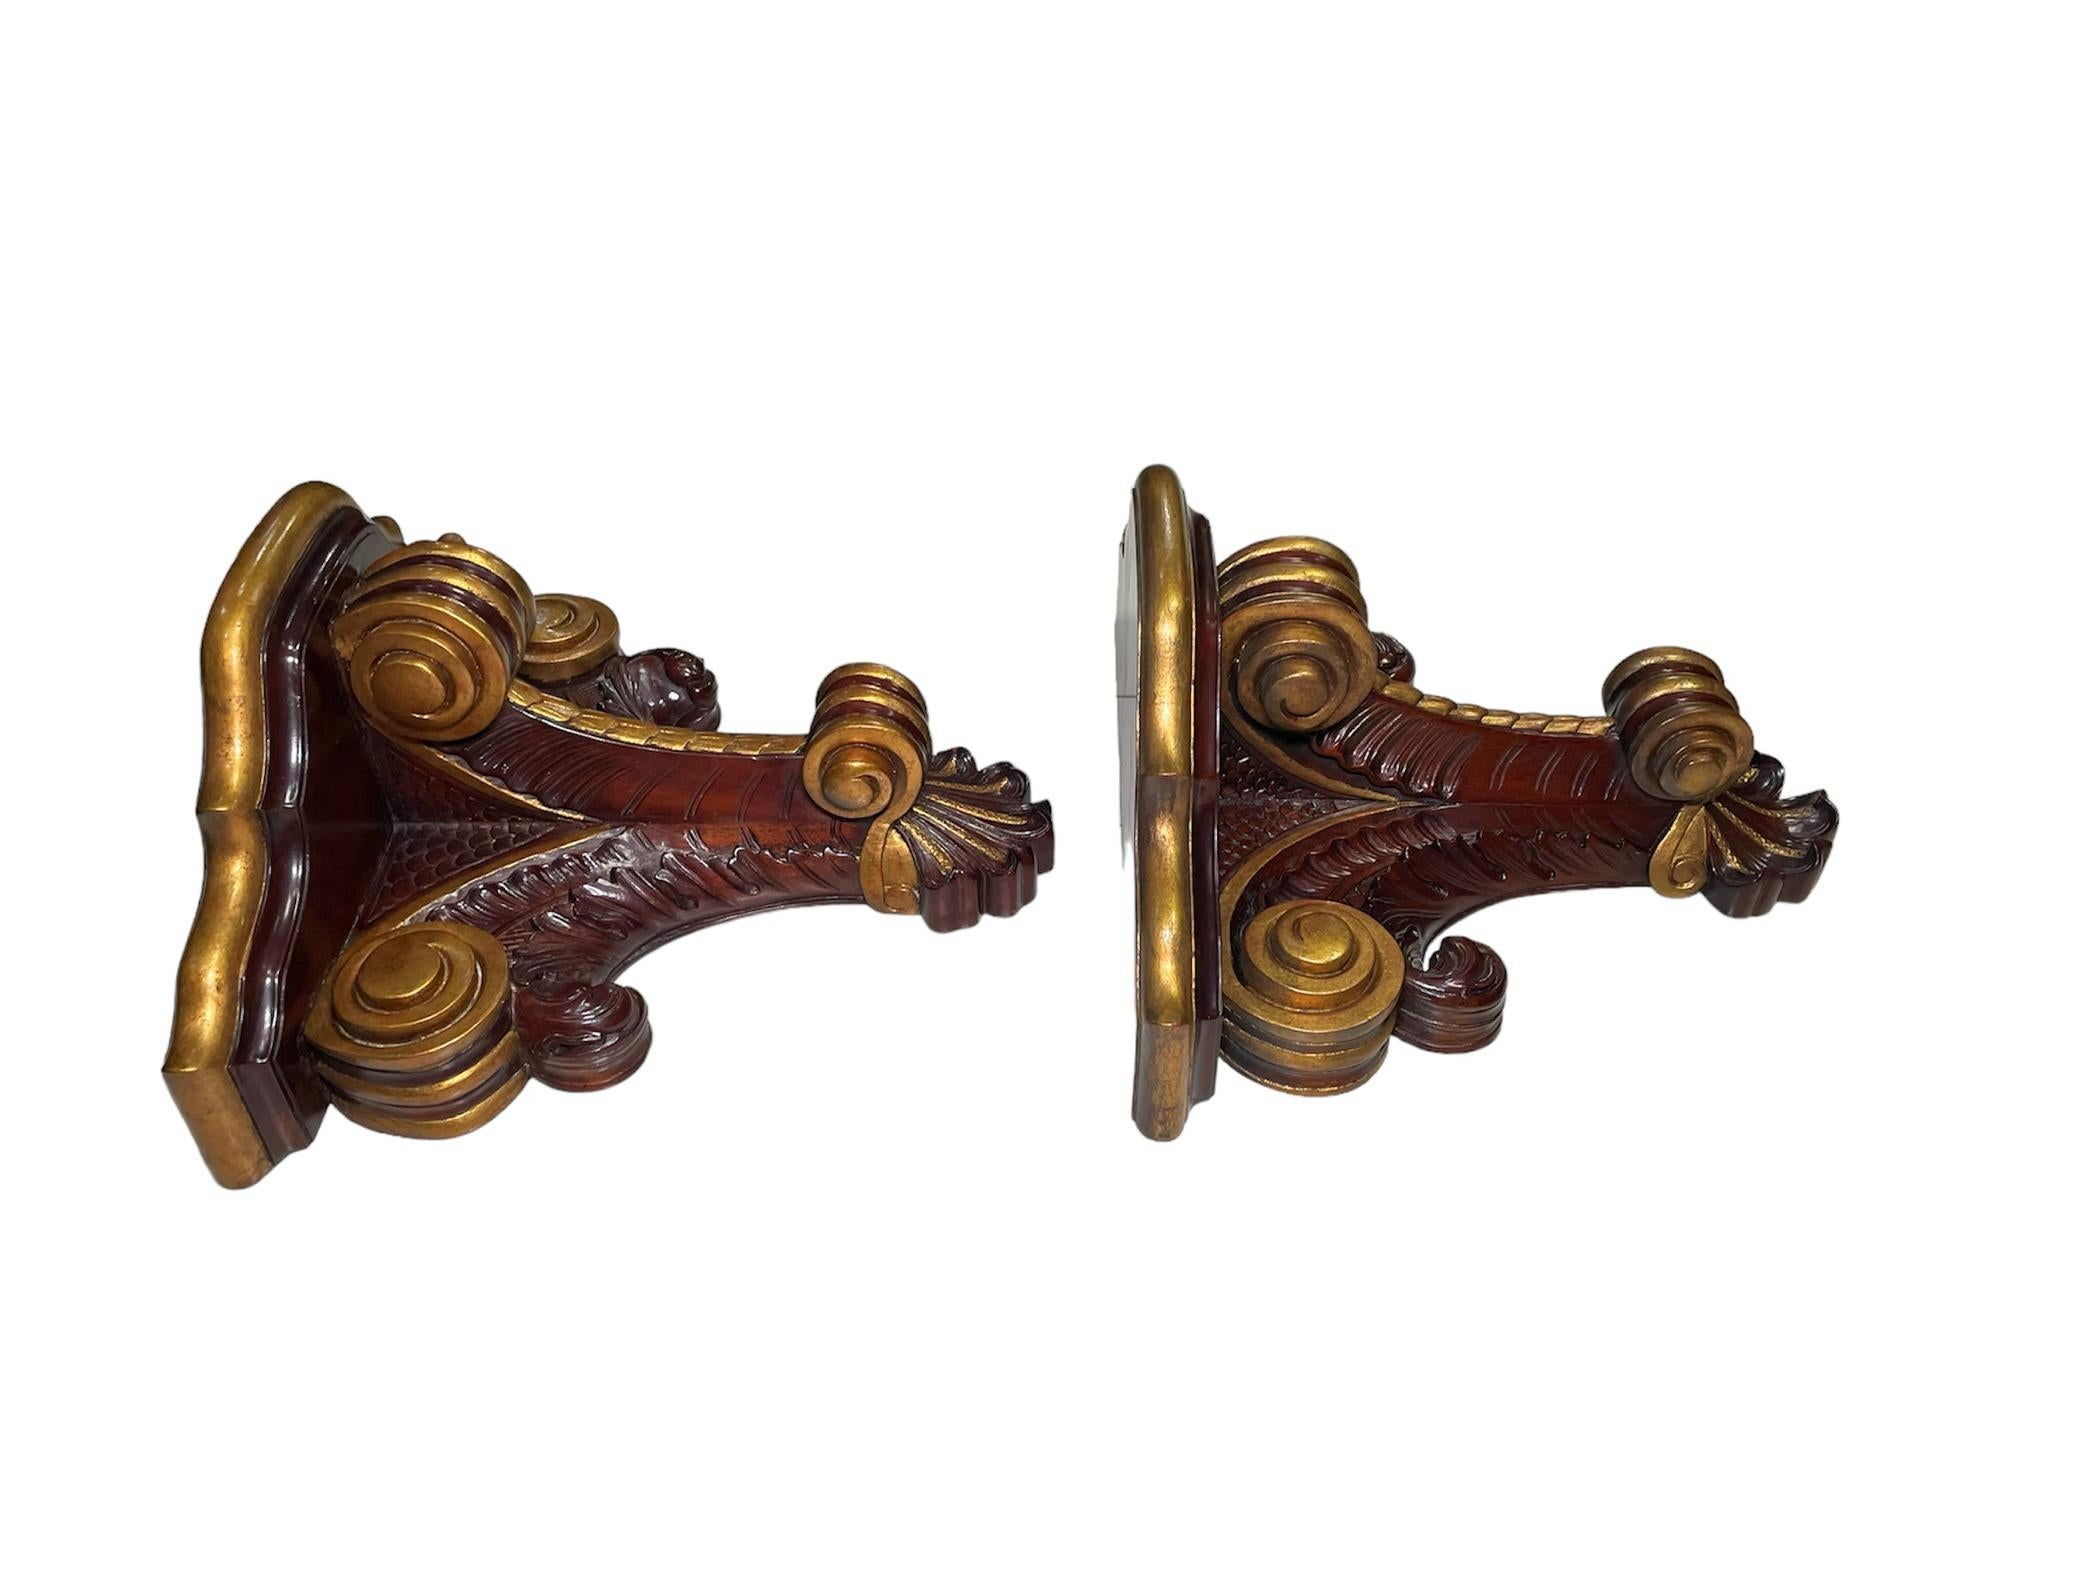 Rococo Style Pair Of Gilt Dark Wood Brackets/Shelves  For Sale 6